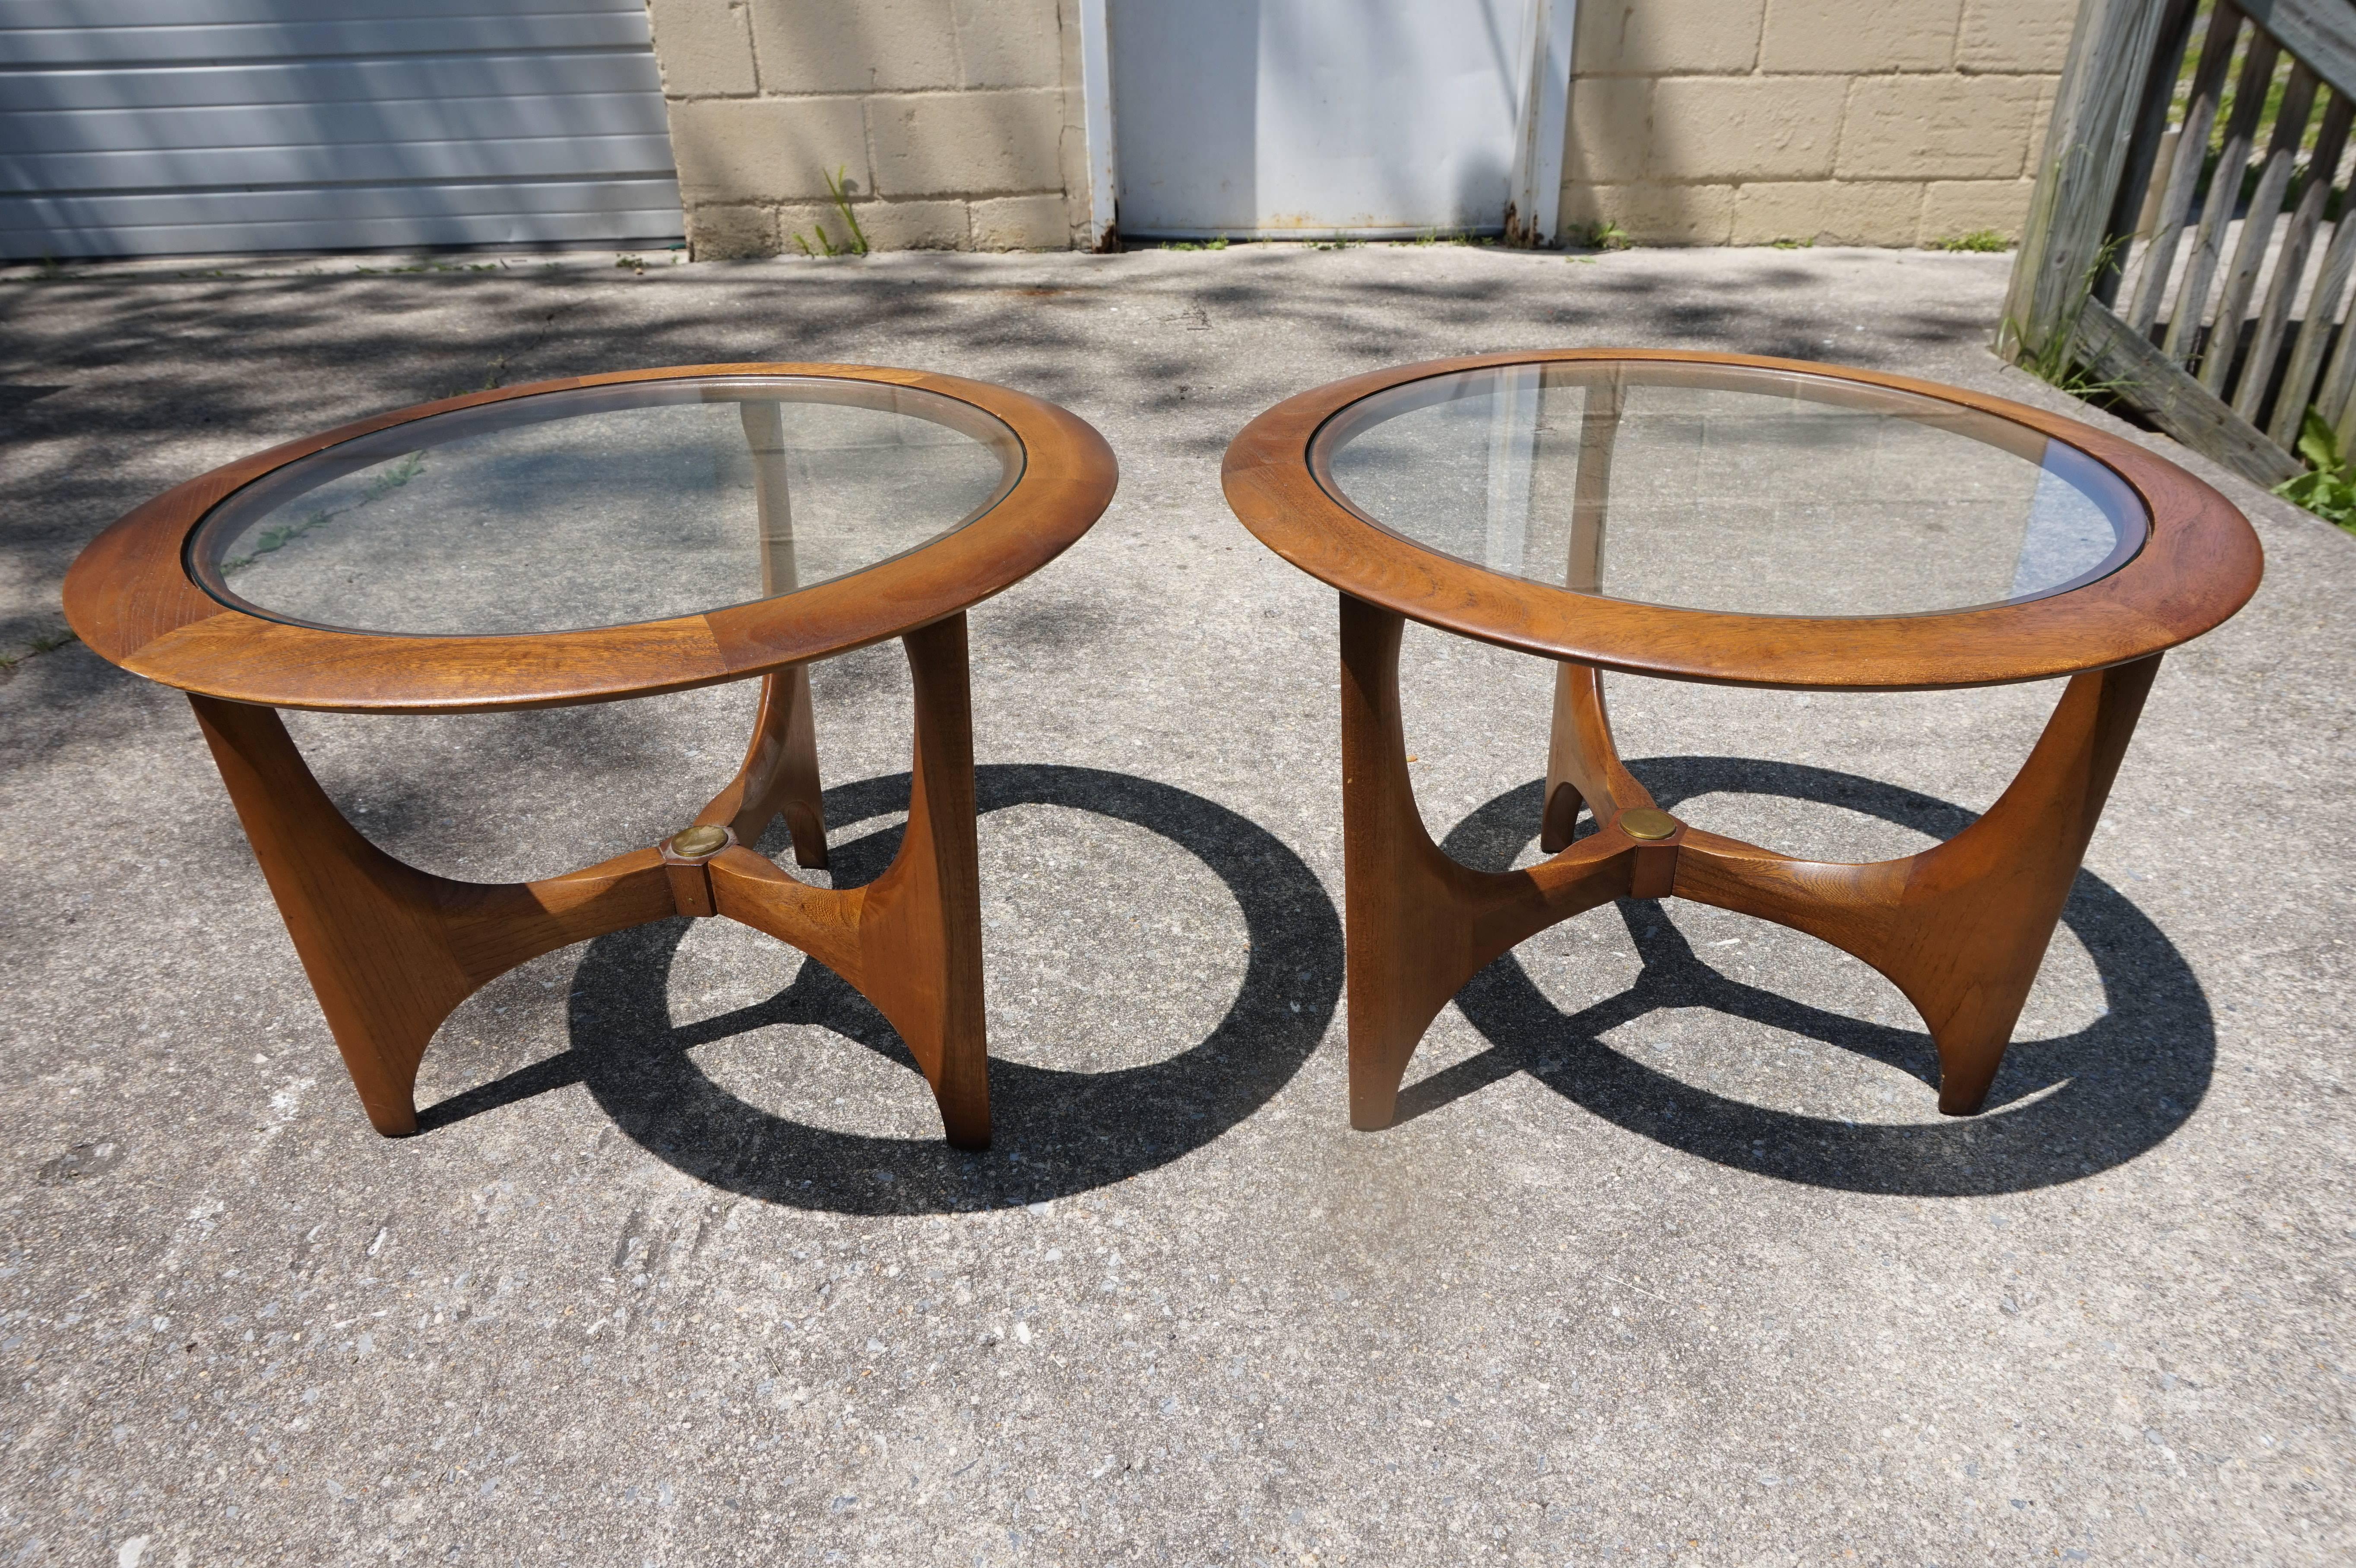 Mid-20th Century Pair of Mid-Century Modern Walnut Glass Round Side Tables, Made by Lane